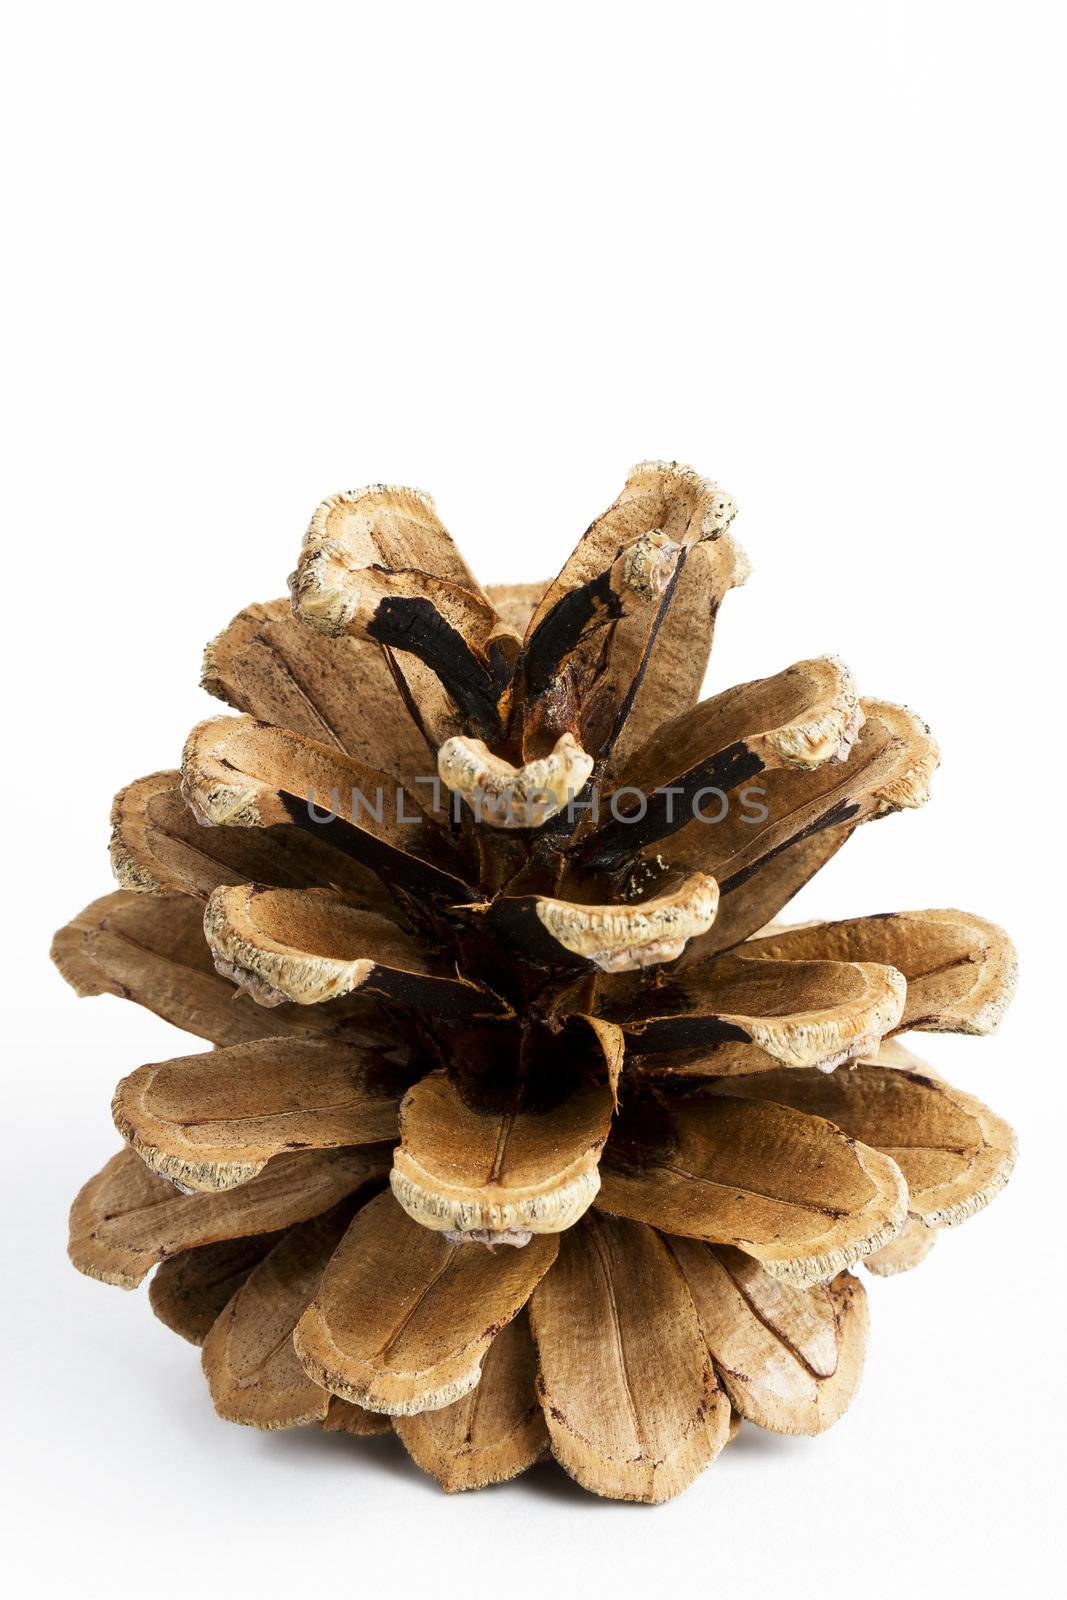 one pine cone isolated on white background